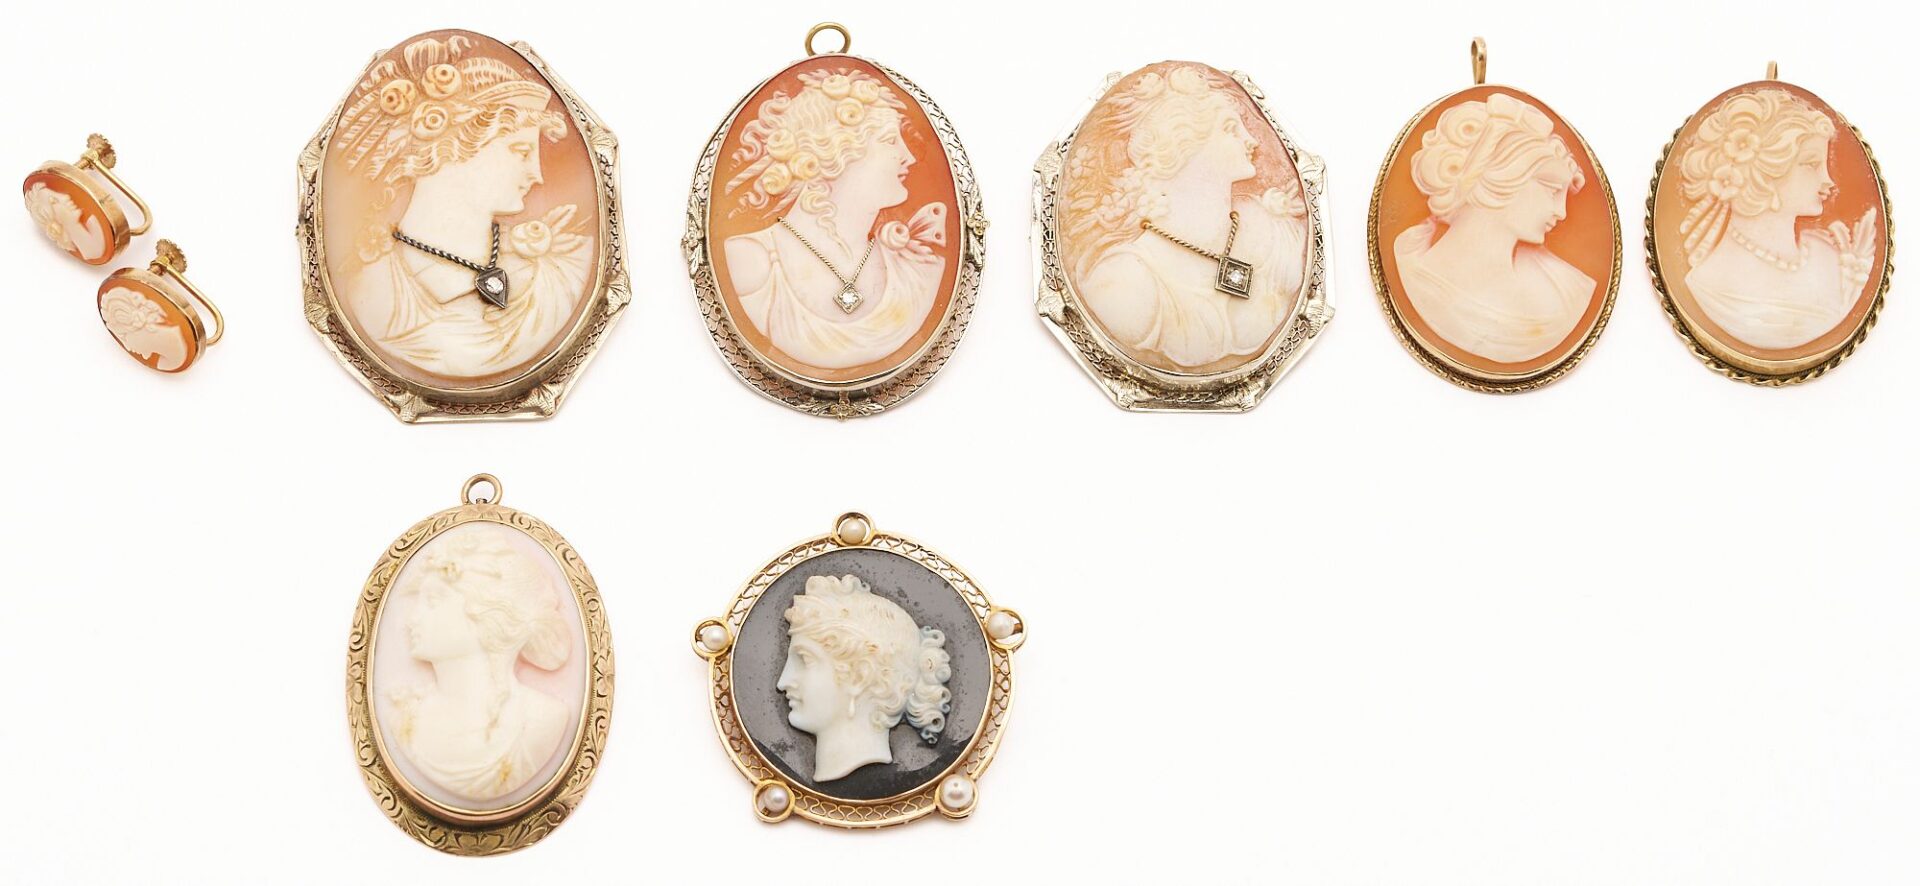 Lot 322: Seven (7) Gold Cameo Brooches & One (1) Pair Cameo Earrings